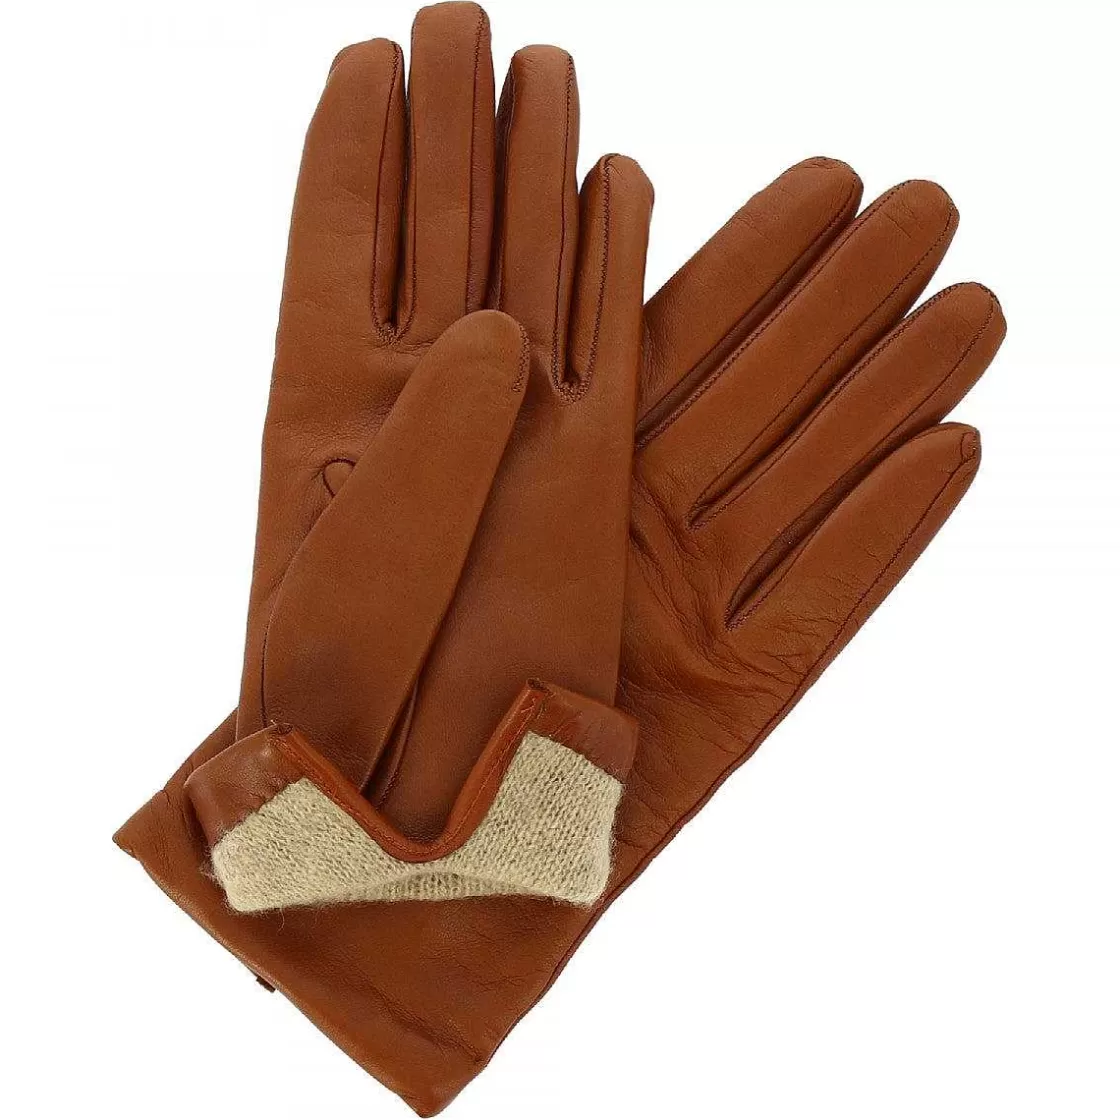 Leonardo Classic Women'S Handmade Gloves In Brown Nappa Leather Lined In Cashmere Fashion